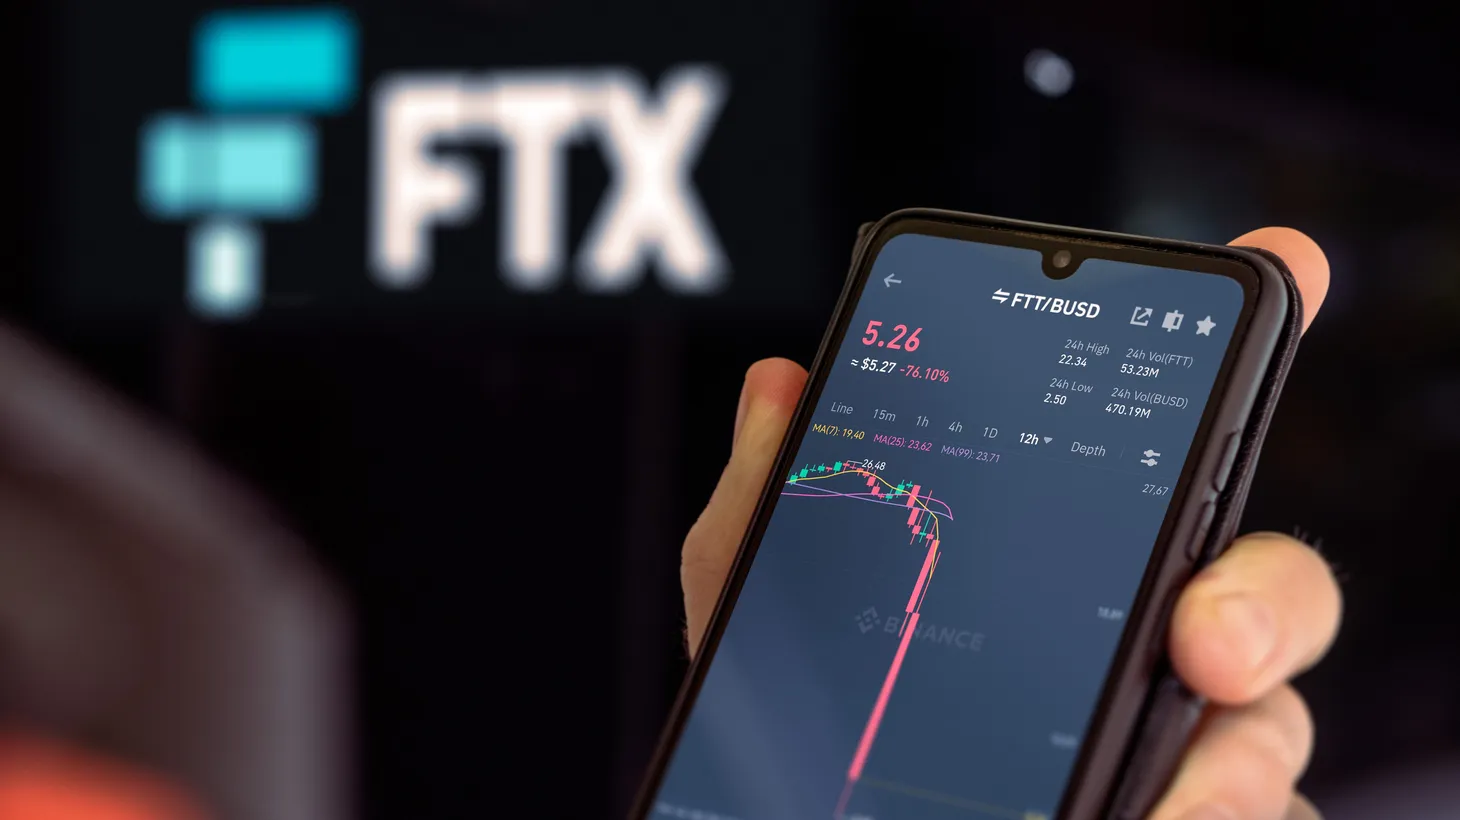 The cryptocurrency exchange company, FTX, lost billions of dollars and went bankrupt in November.